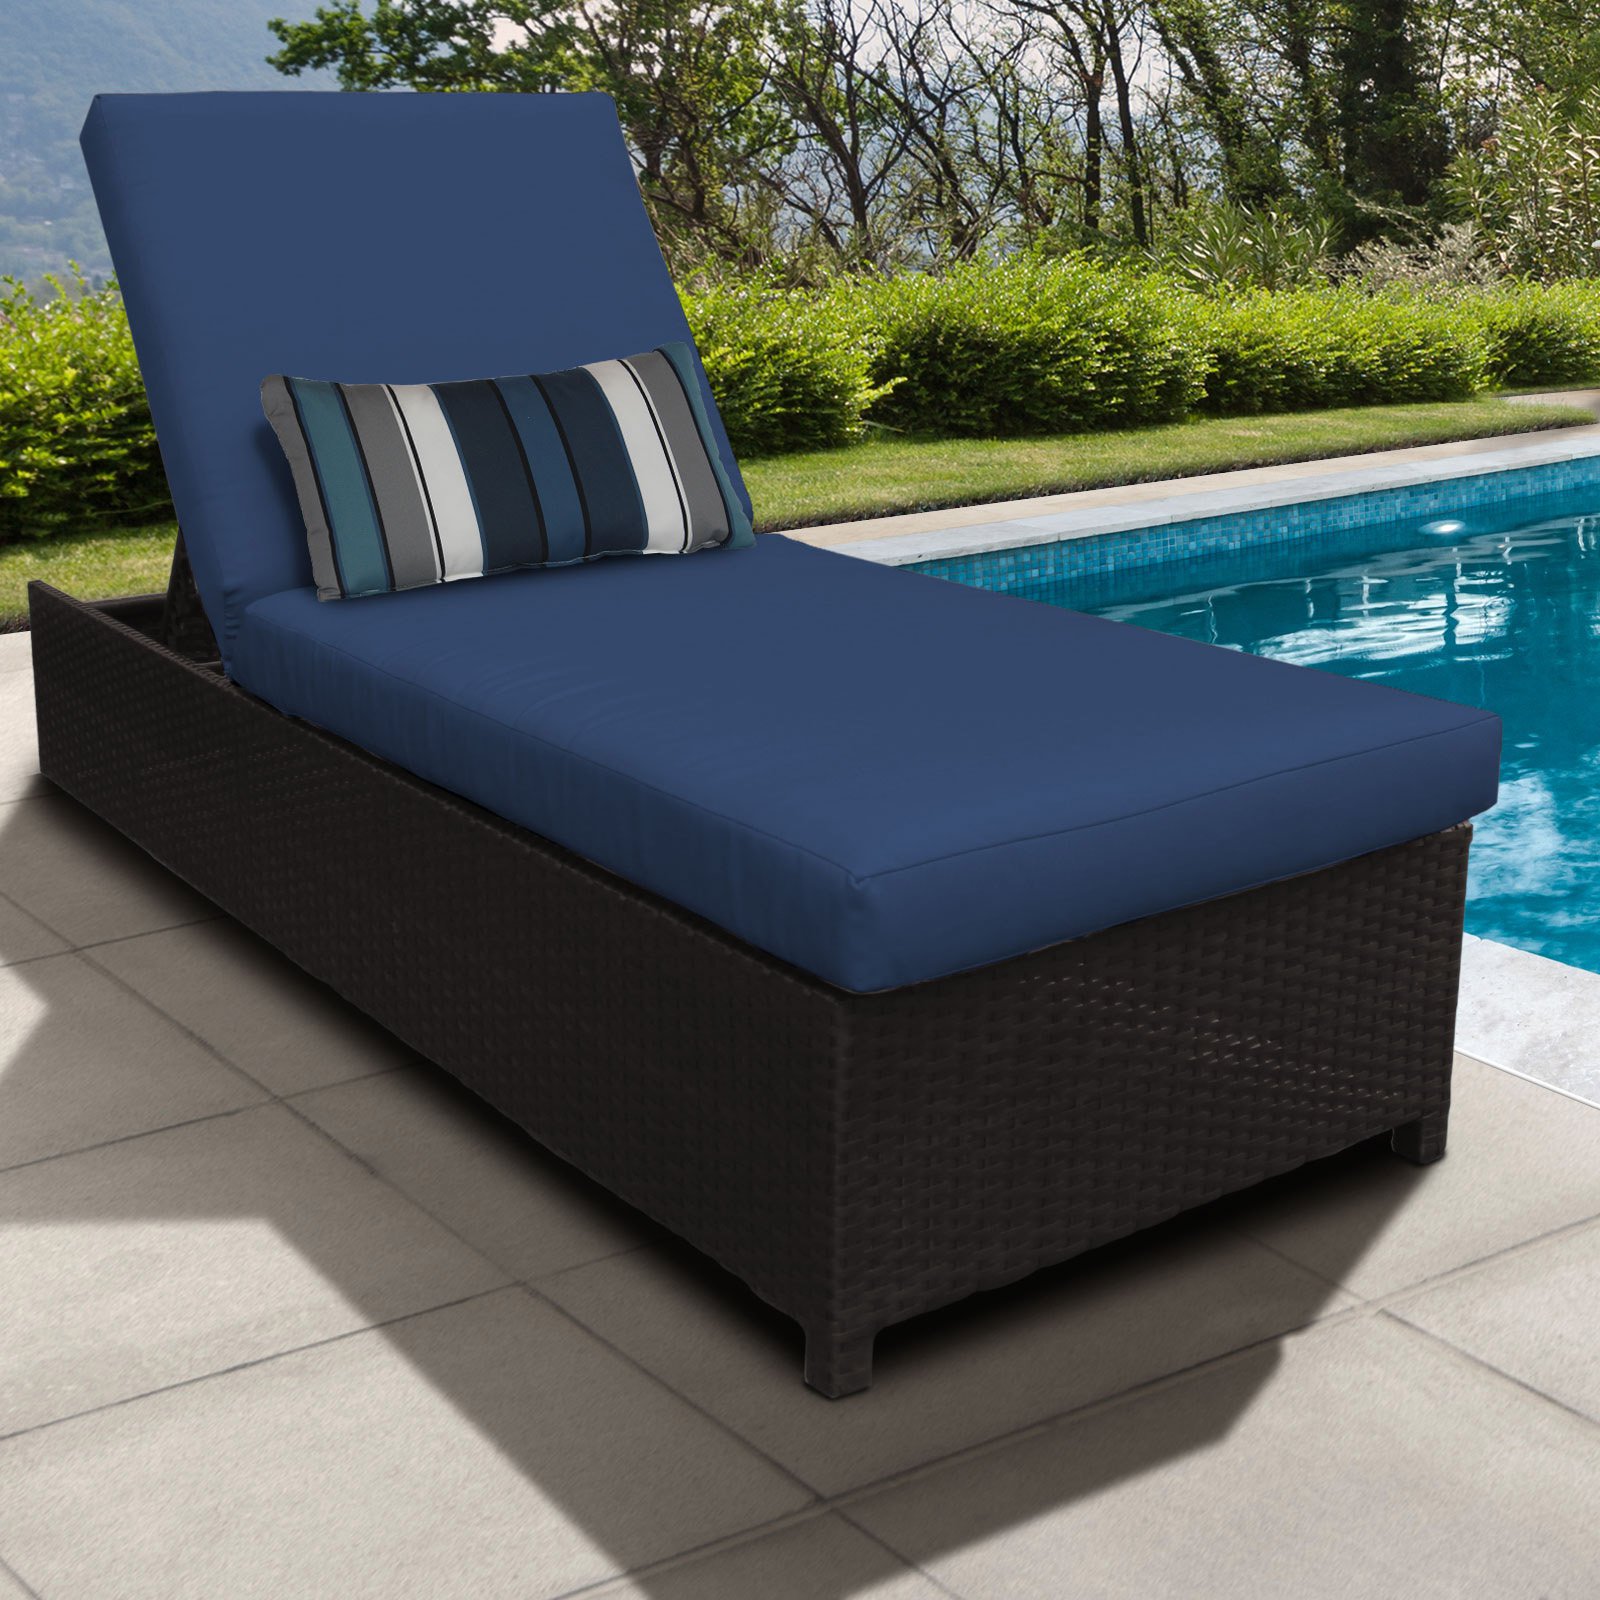 TK Classics Belle Wheeled Wicker Outdoor Chaise Lounge Chair - image 4 of 11